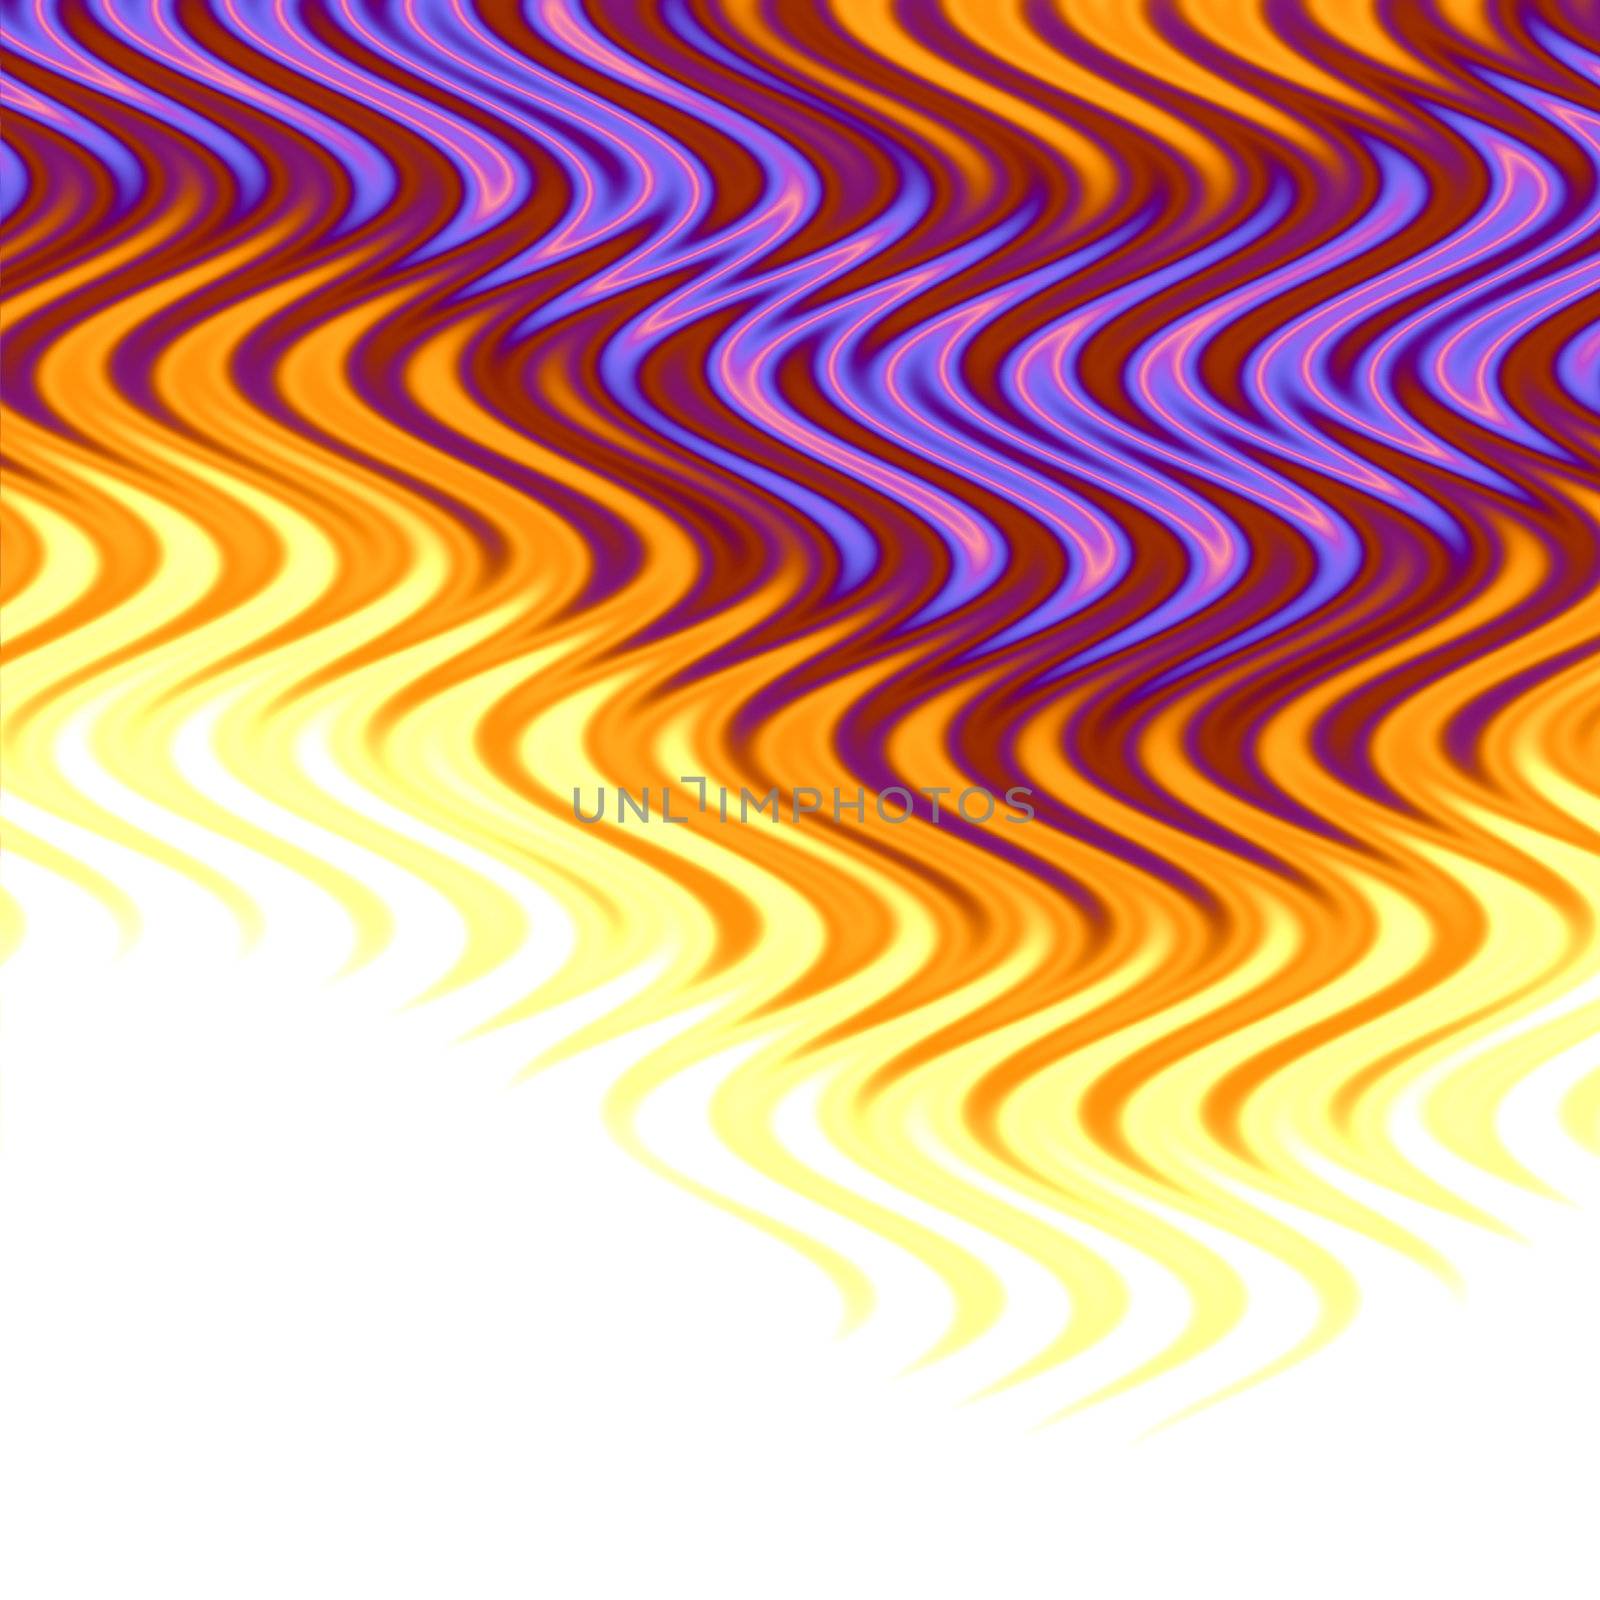 Swirly Background Flames by graficallyminded